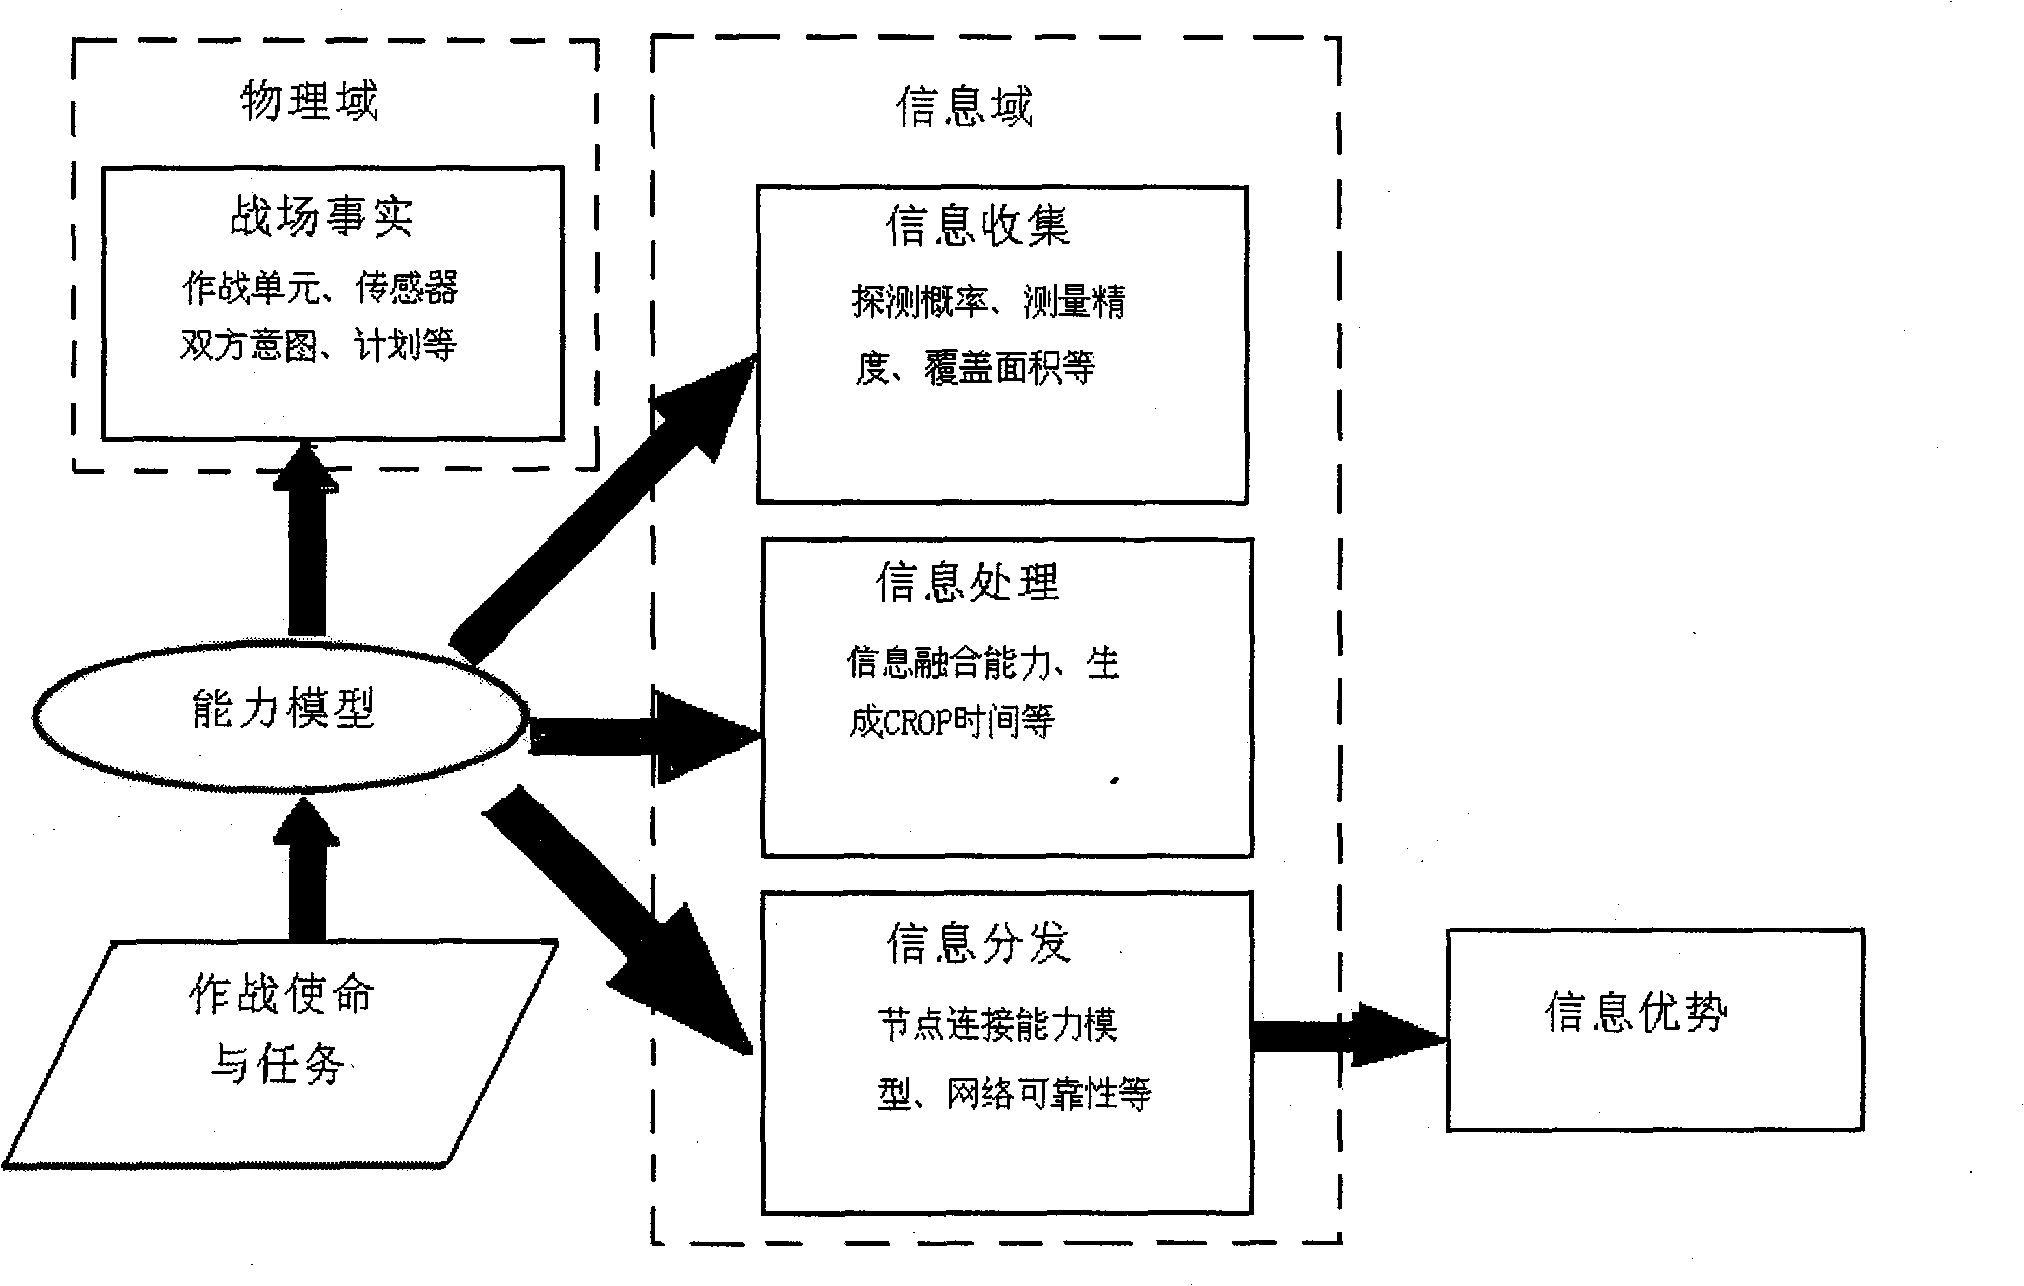 Information support capability evaluation analysis method of complex system